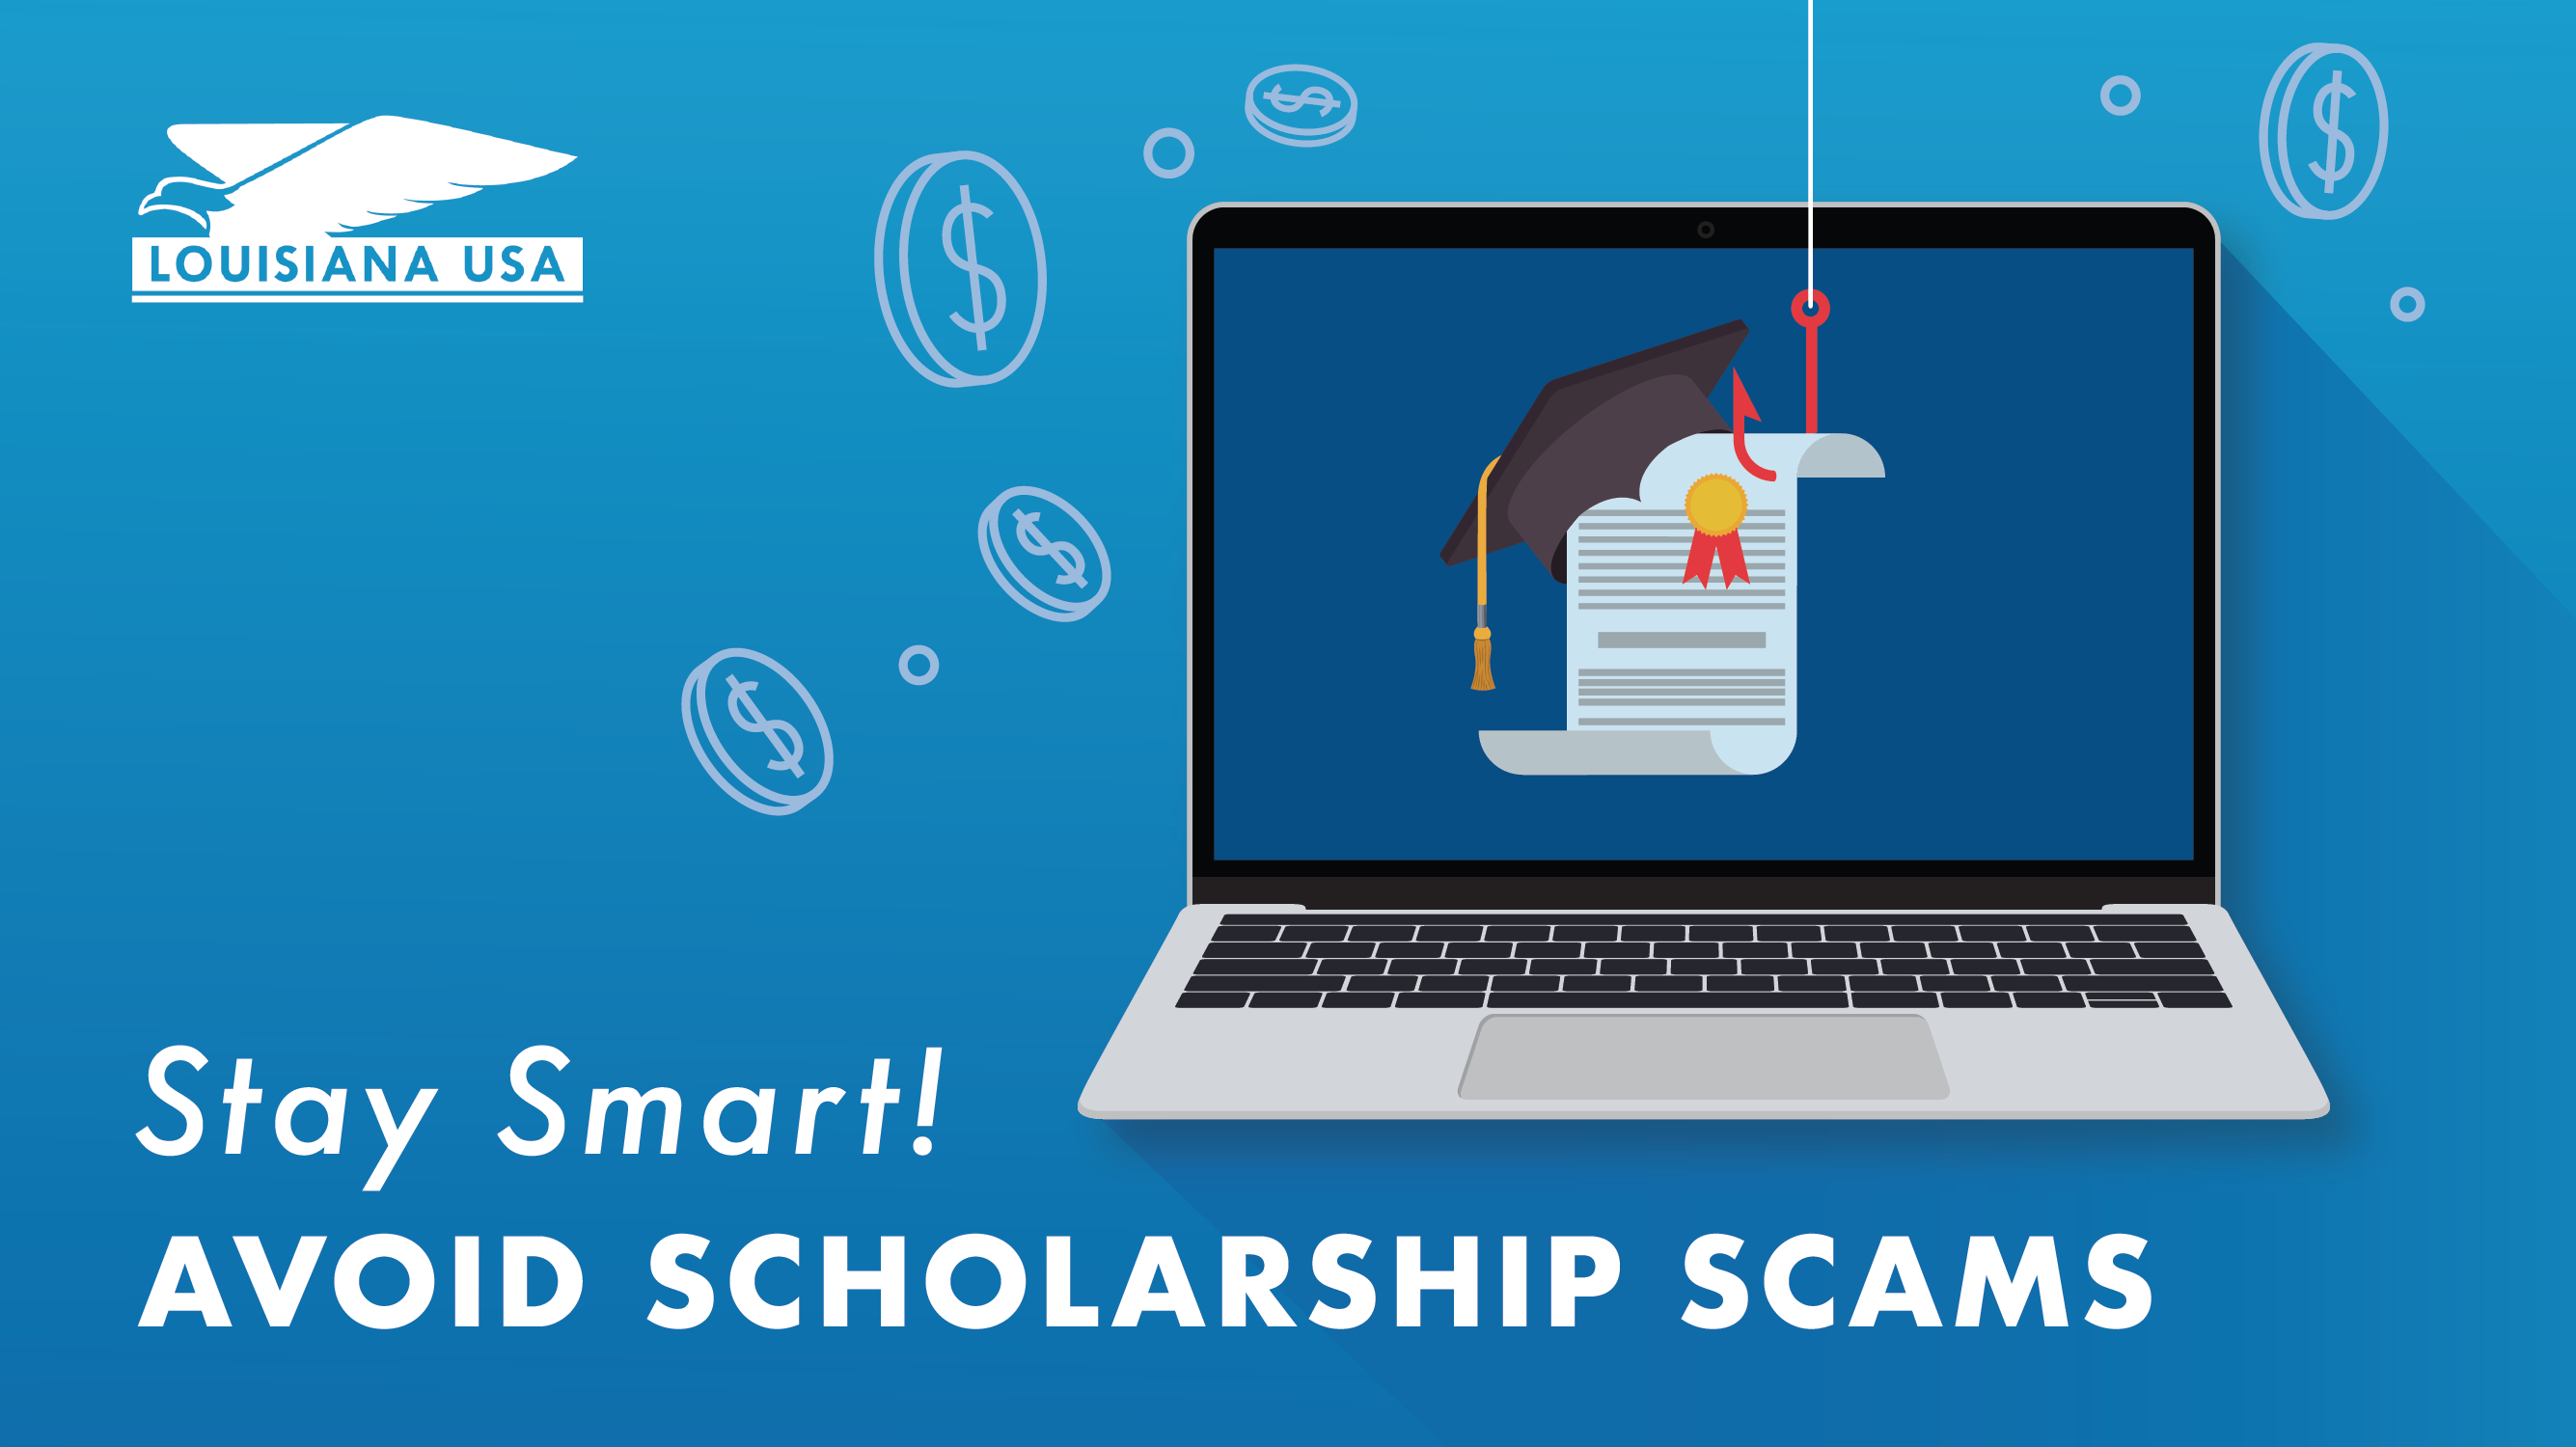 Stay Smart! Avoid Scholarship Scams